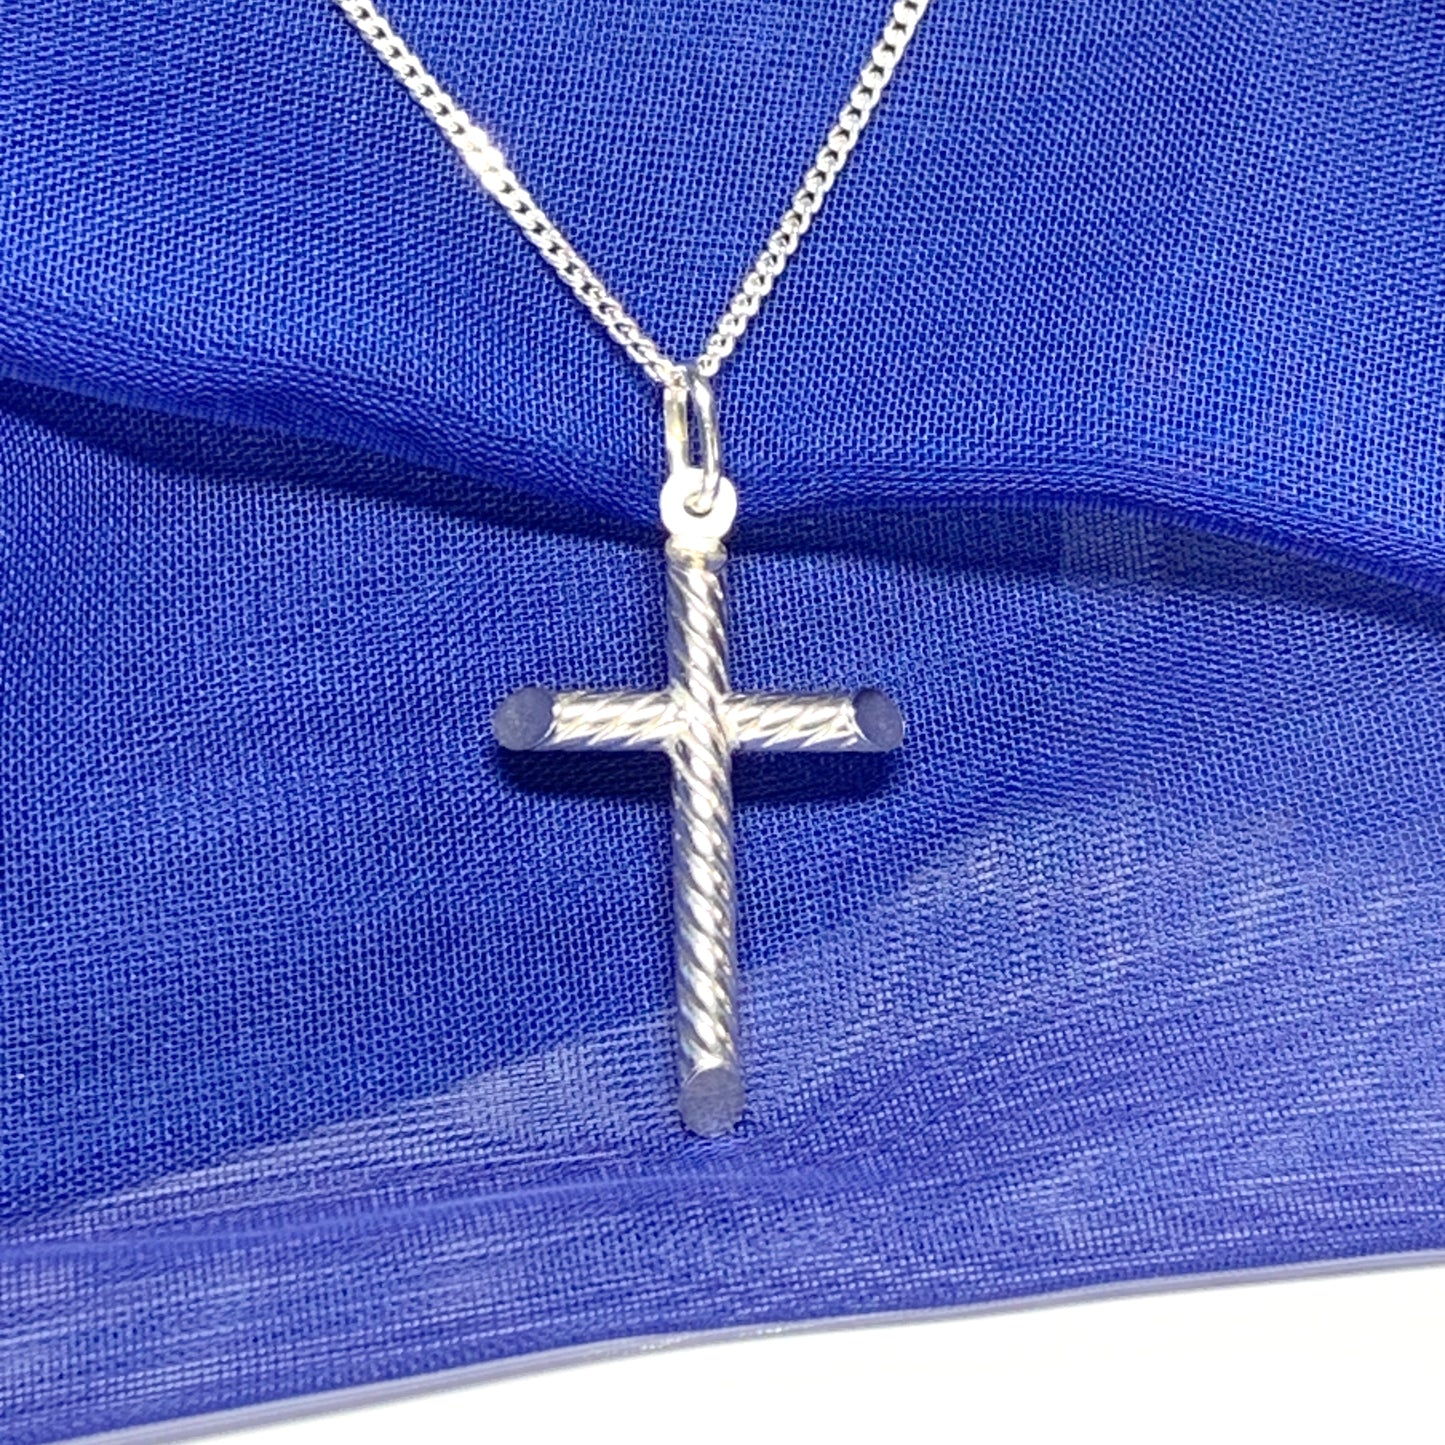 Solid diamond cut cross patterned sterling silver and chain